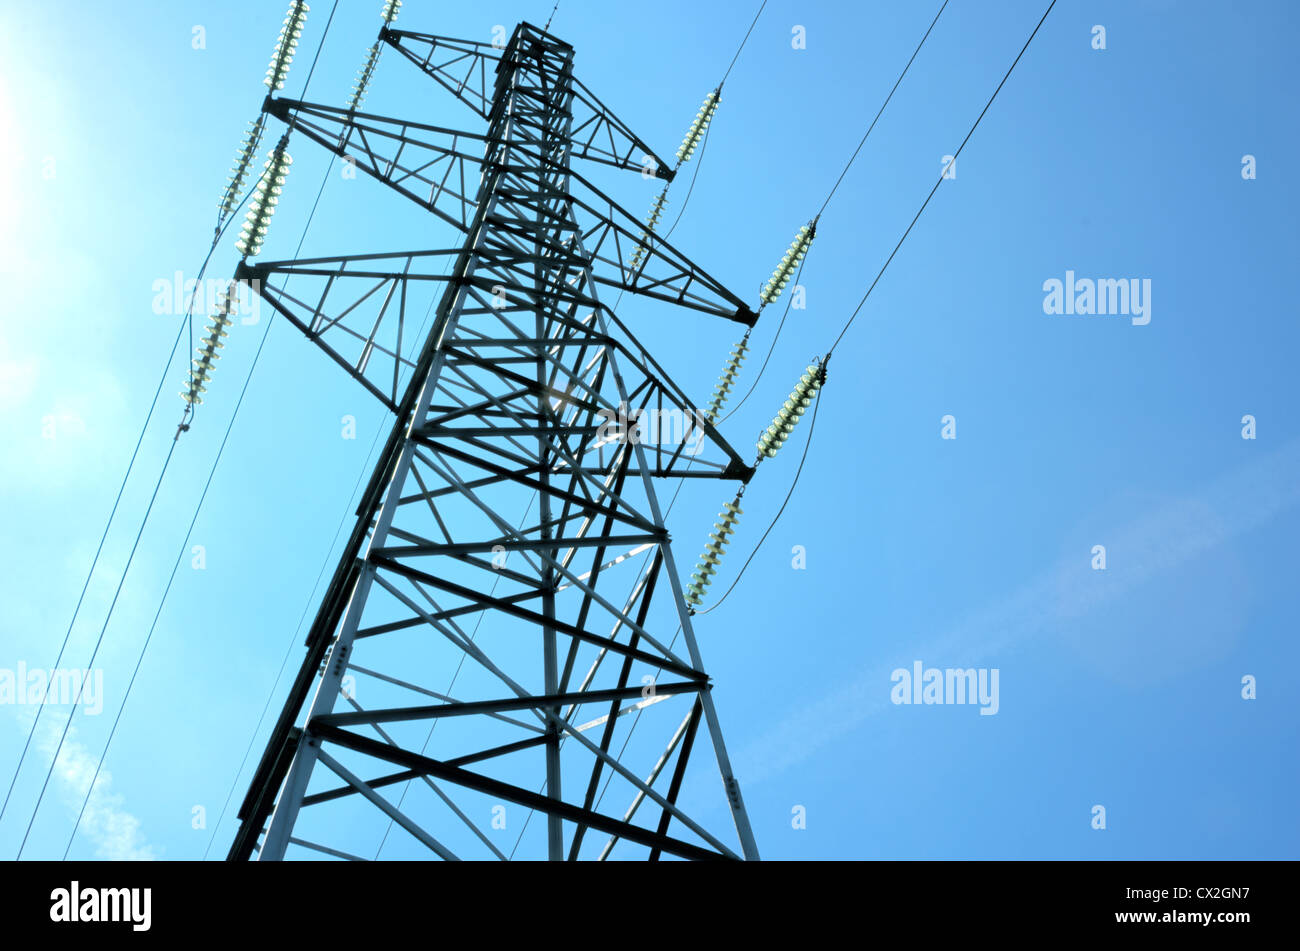 An electricity power tower against a blue sky Stock Photo